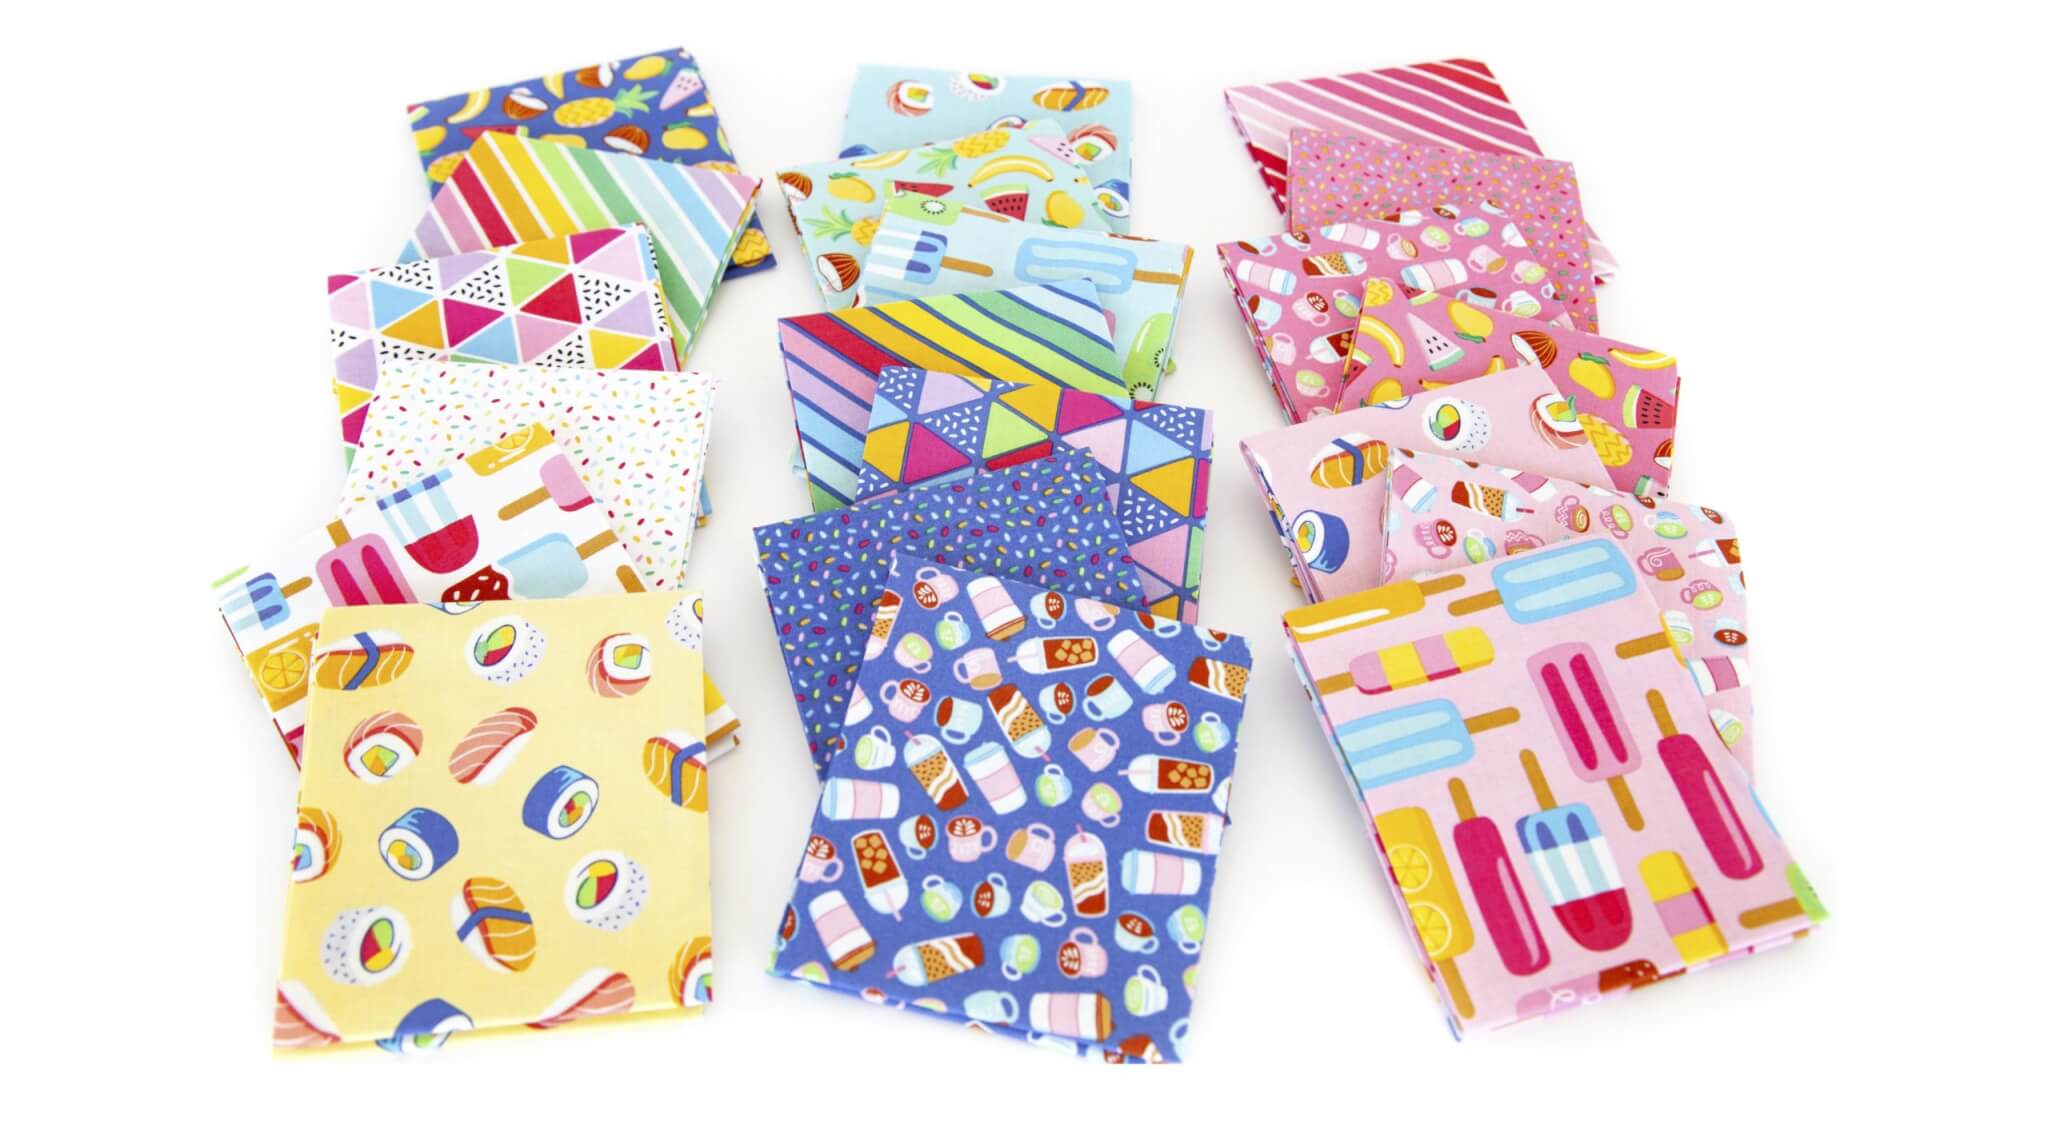 NEW! Rainbowfruit Fabrics by Riley Blake Designs now available at Nancy Zieman Productions at ShopNZP.com